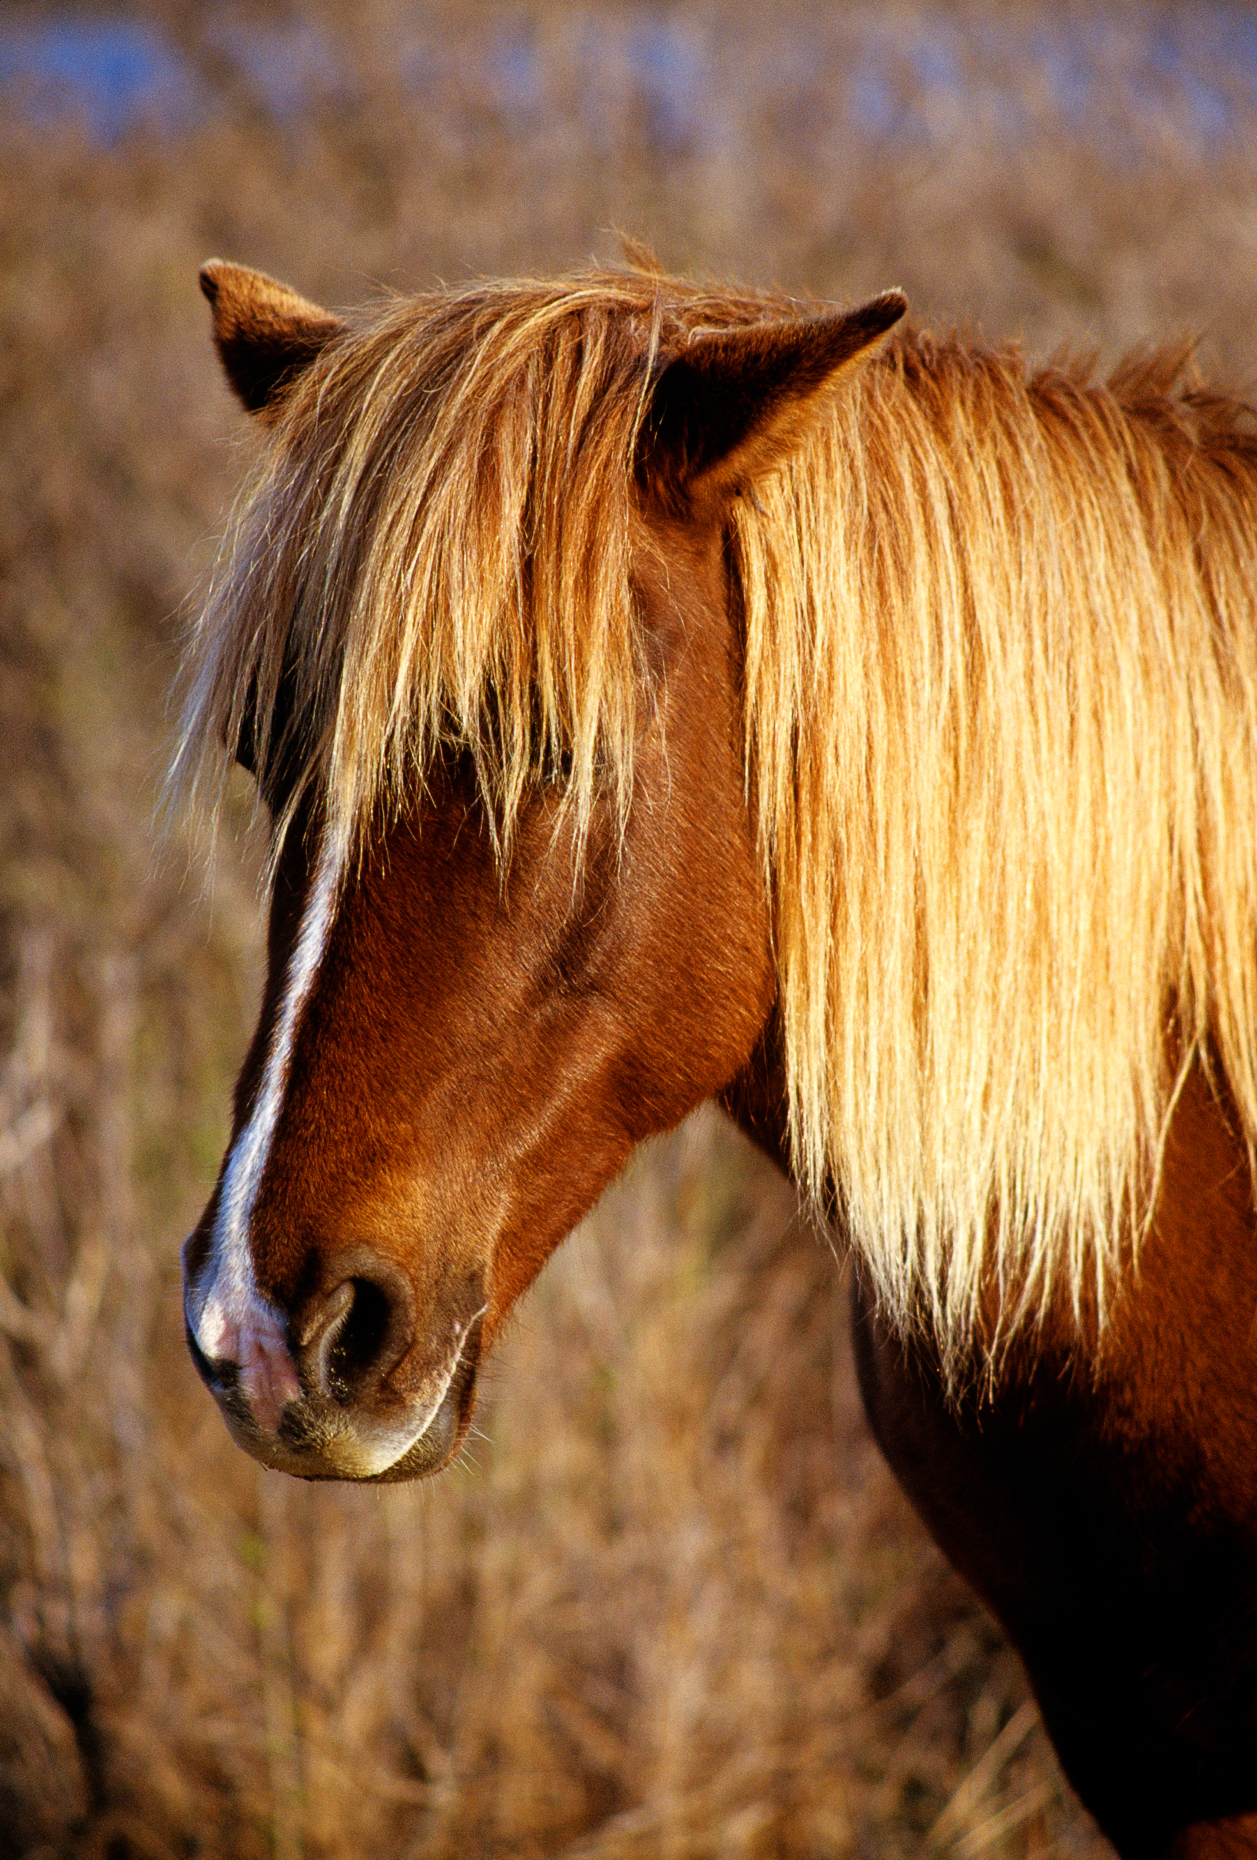 Wild horses (known as "Ponies") in Chincoteague National Wildlife Refuge, Assateague Island, Virginia, USA